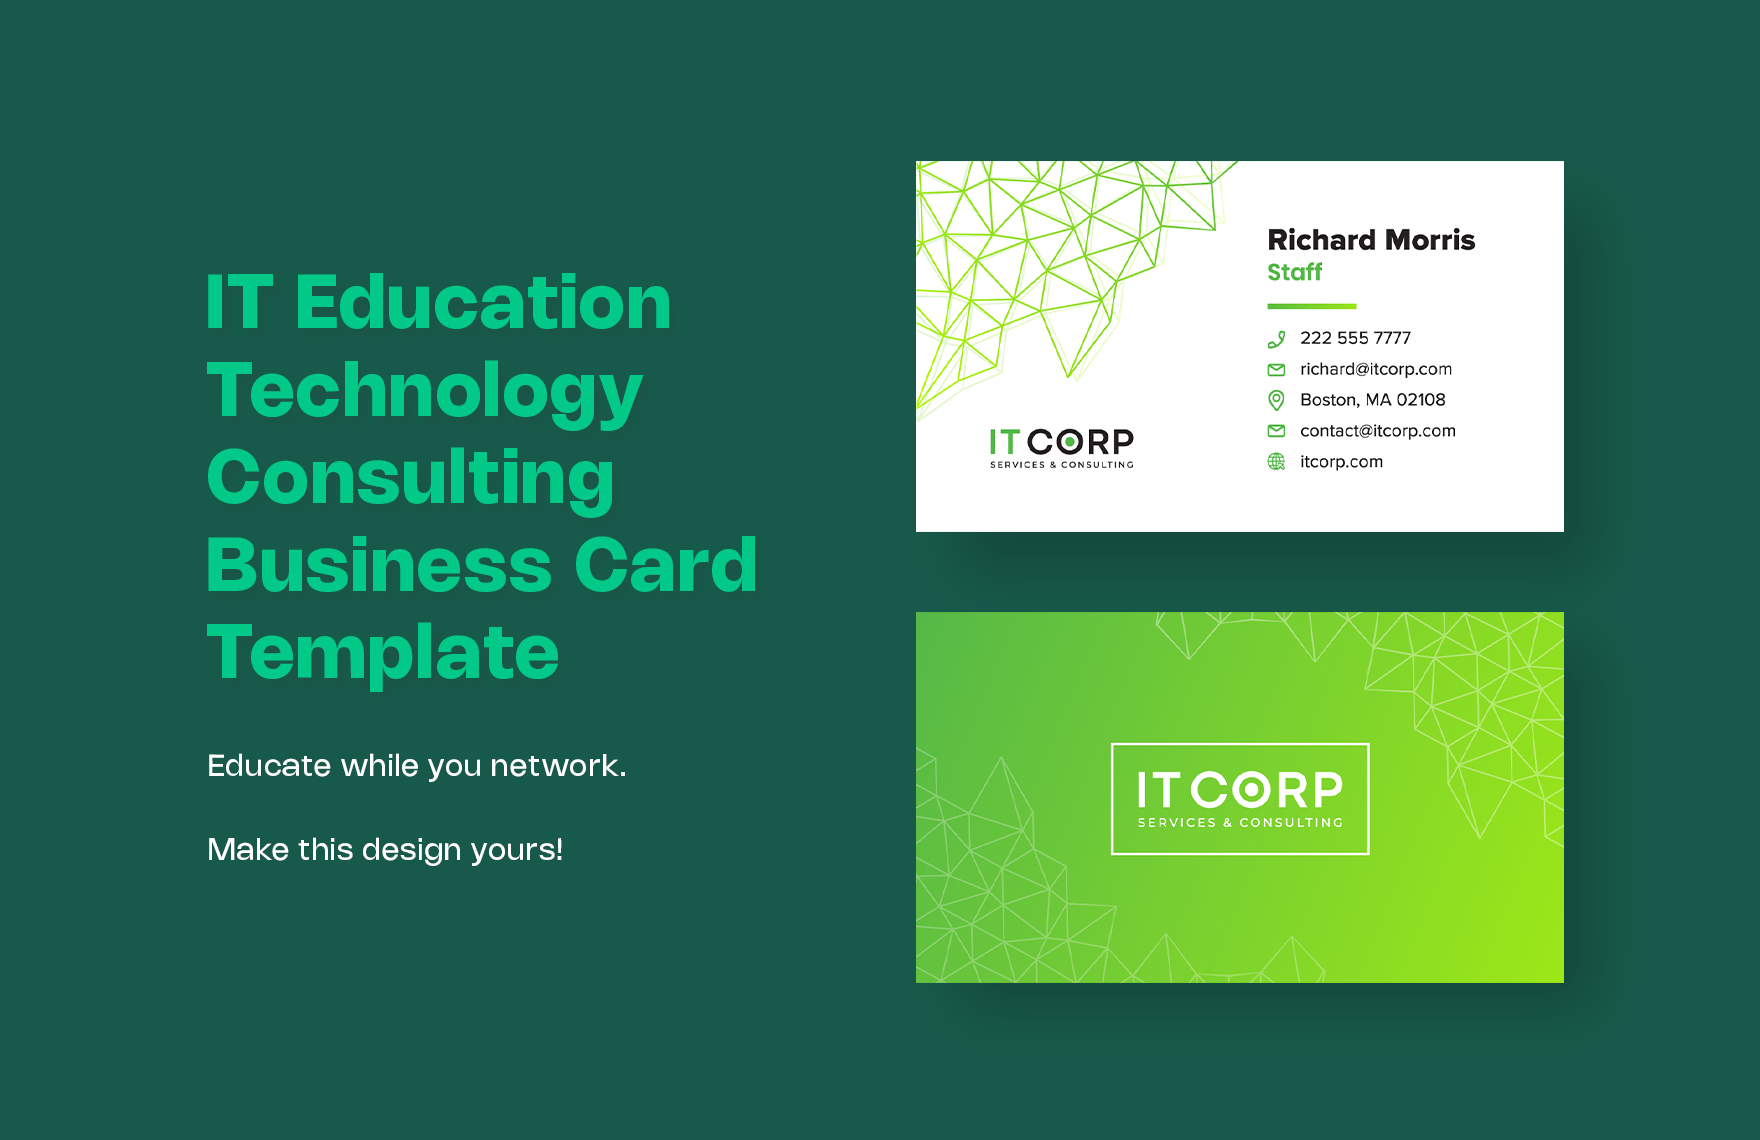 IT Education Technology Consulting Business Card Template in Word, Illustrator, PSD